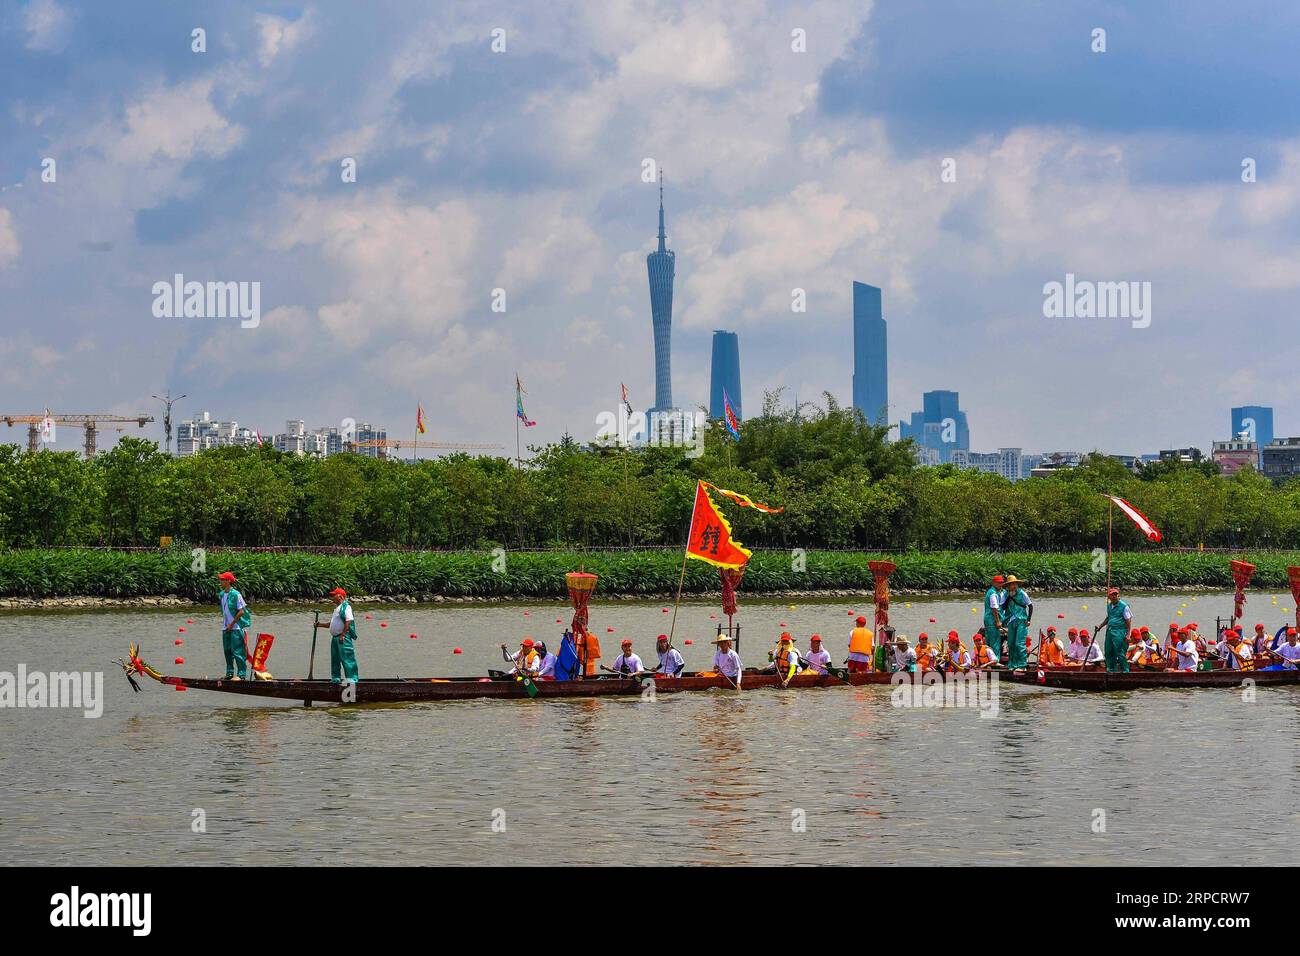 (190712) -- BEIJING, July 12, 2019 -- Participants compete in a dragon boat race near the Haizhu wetland in Guangzhou, capital of south China s Guangdong Province, June 6, 2019. Located in south China, Guangdong Province faces the South China Sea and borders Hunan and Jiangxi provinces to the north. It boasts the well-known Pearl River Delta, which is composed of three upstream rivers and a large number of islands. Due to the climate, Guangdong is famous for a diversified ecological system and environment. In recent years, by upholding the principle of green development, Guangdong has made rem Stock Photo